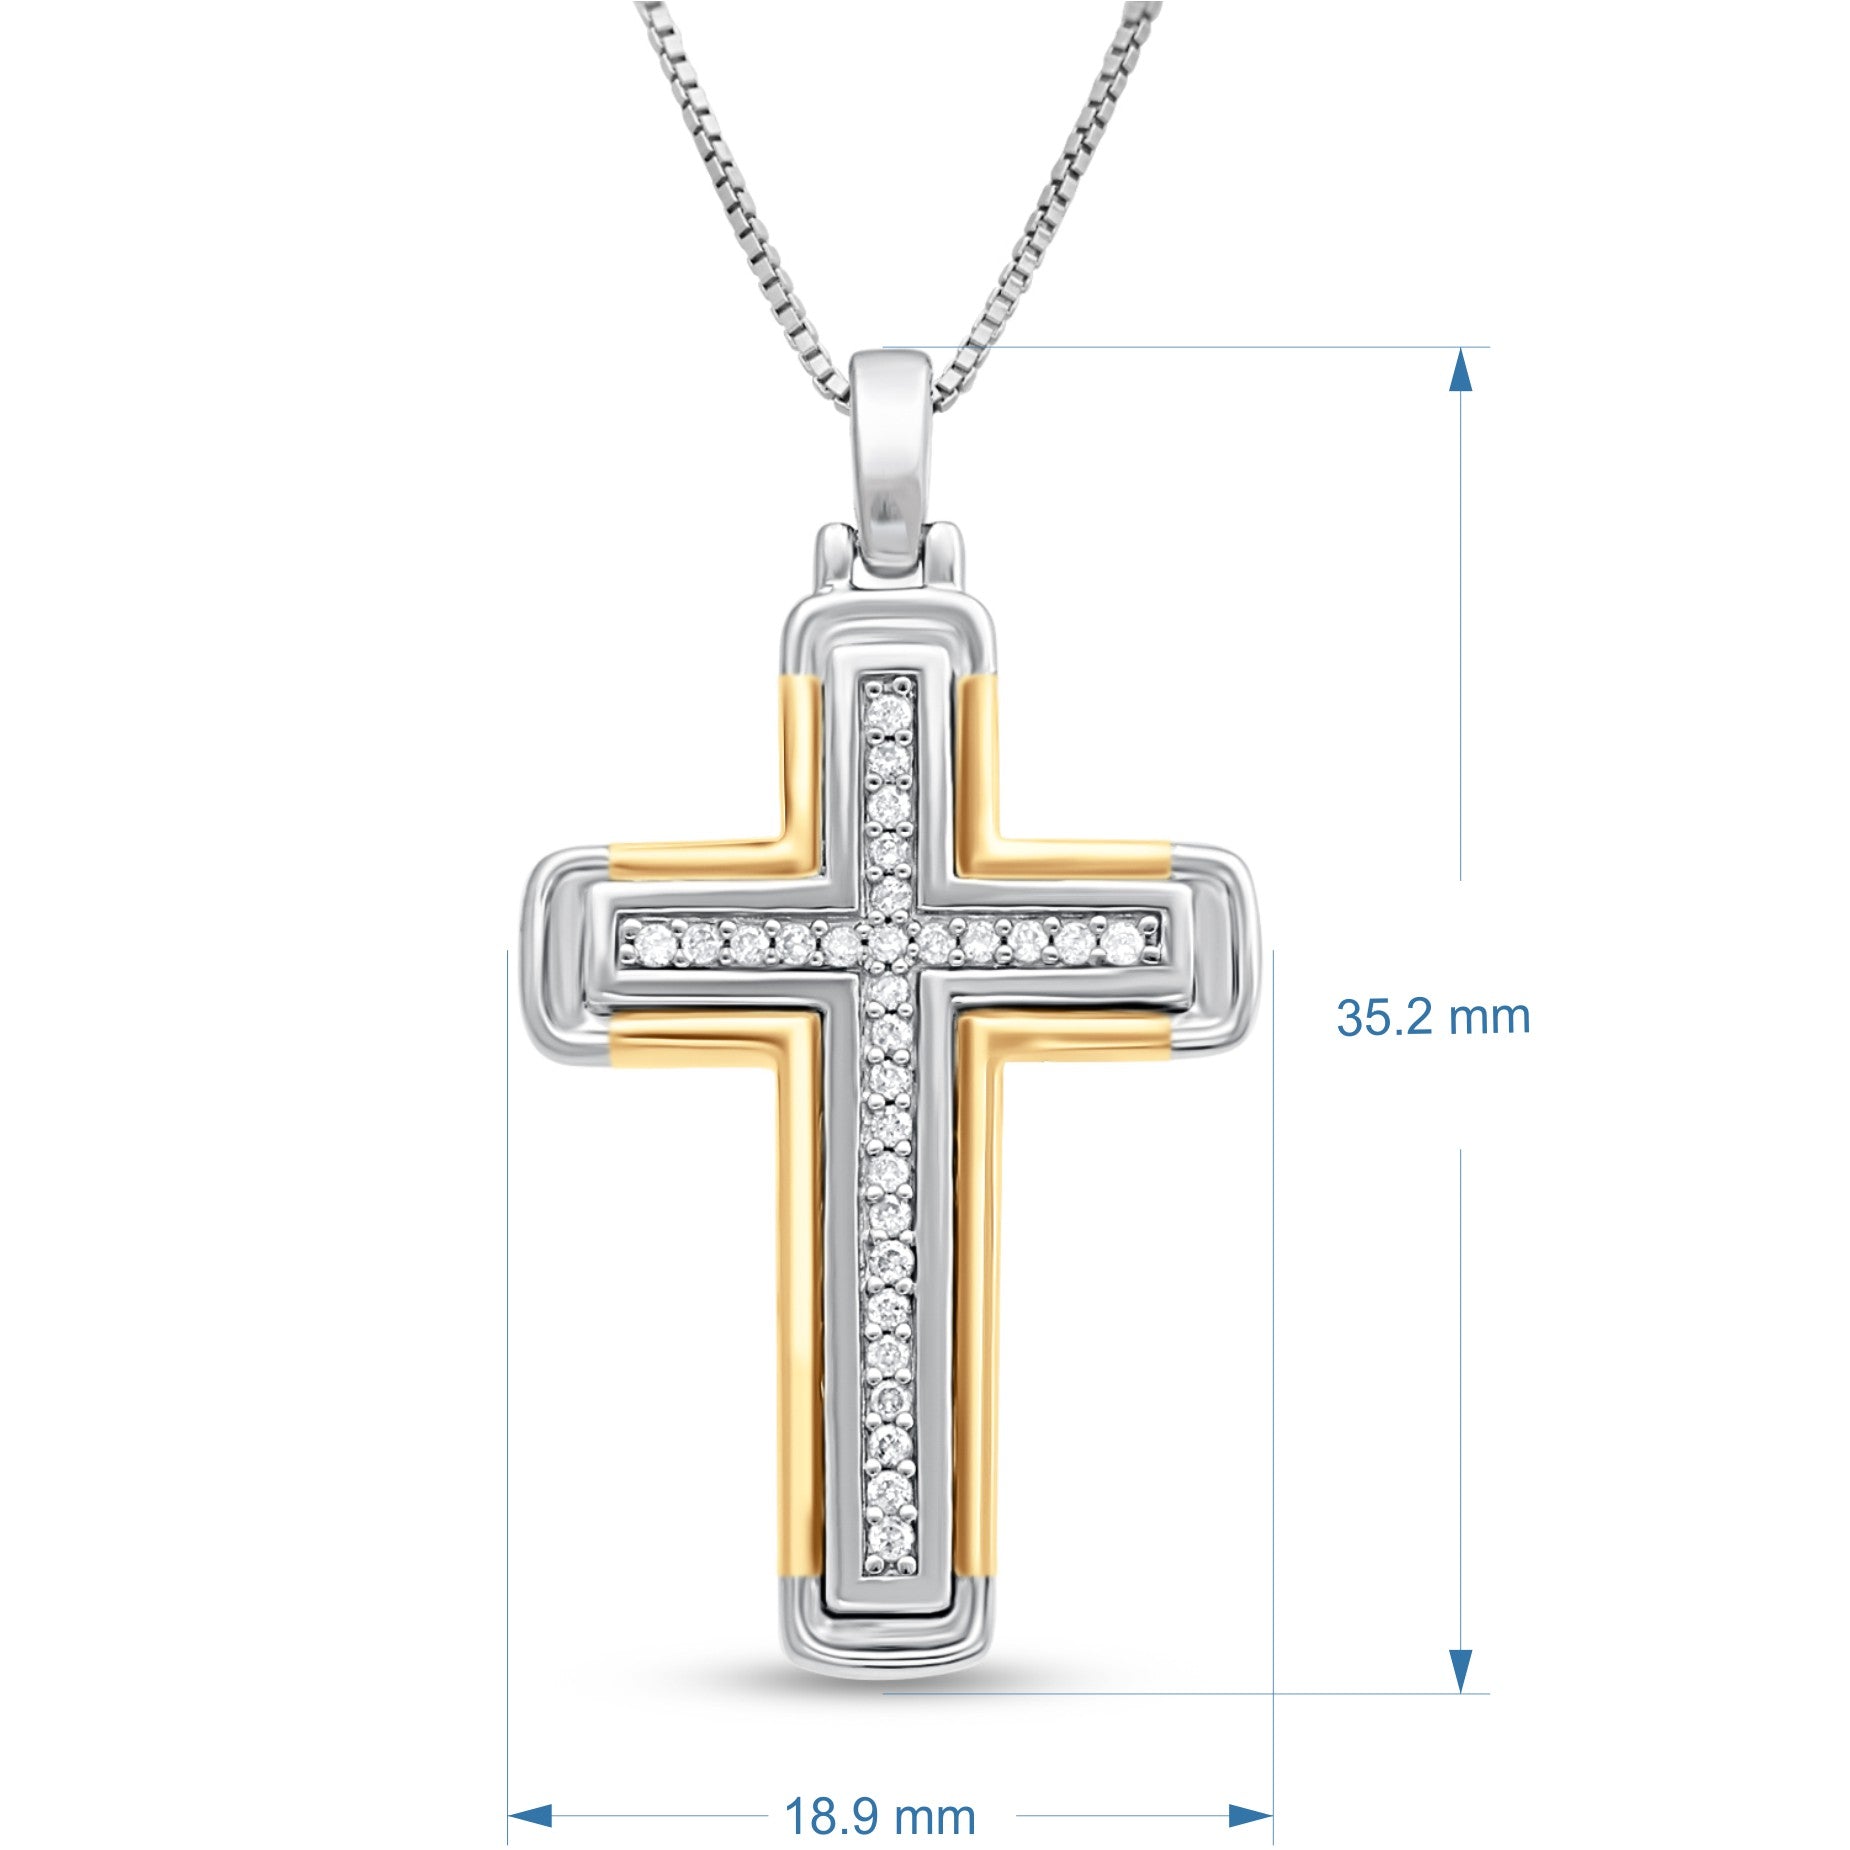 Jewelili Sterling Silver with 1/2 Cttw Natural White Round Diamond Men's Dog Tags Pendant Necklace, 18 inch Box Chain, Size: One Size